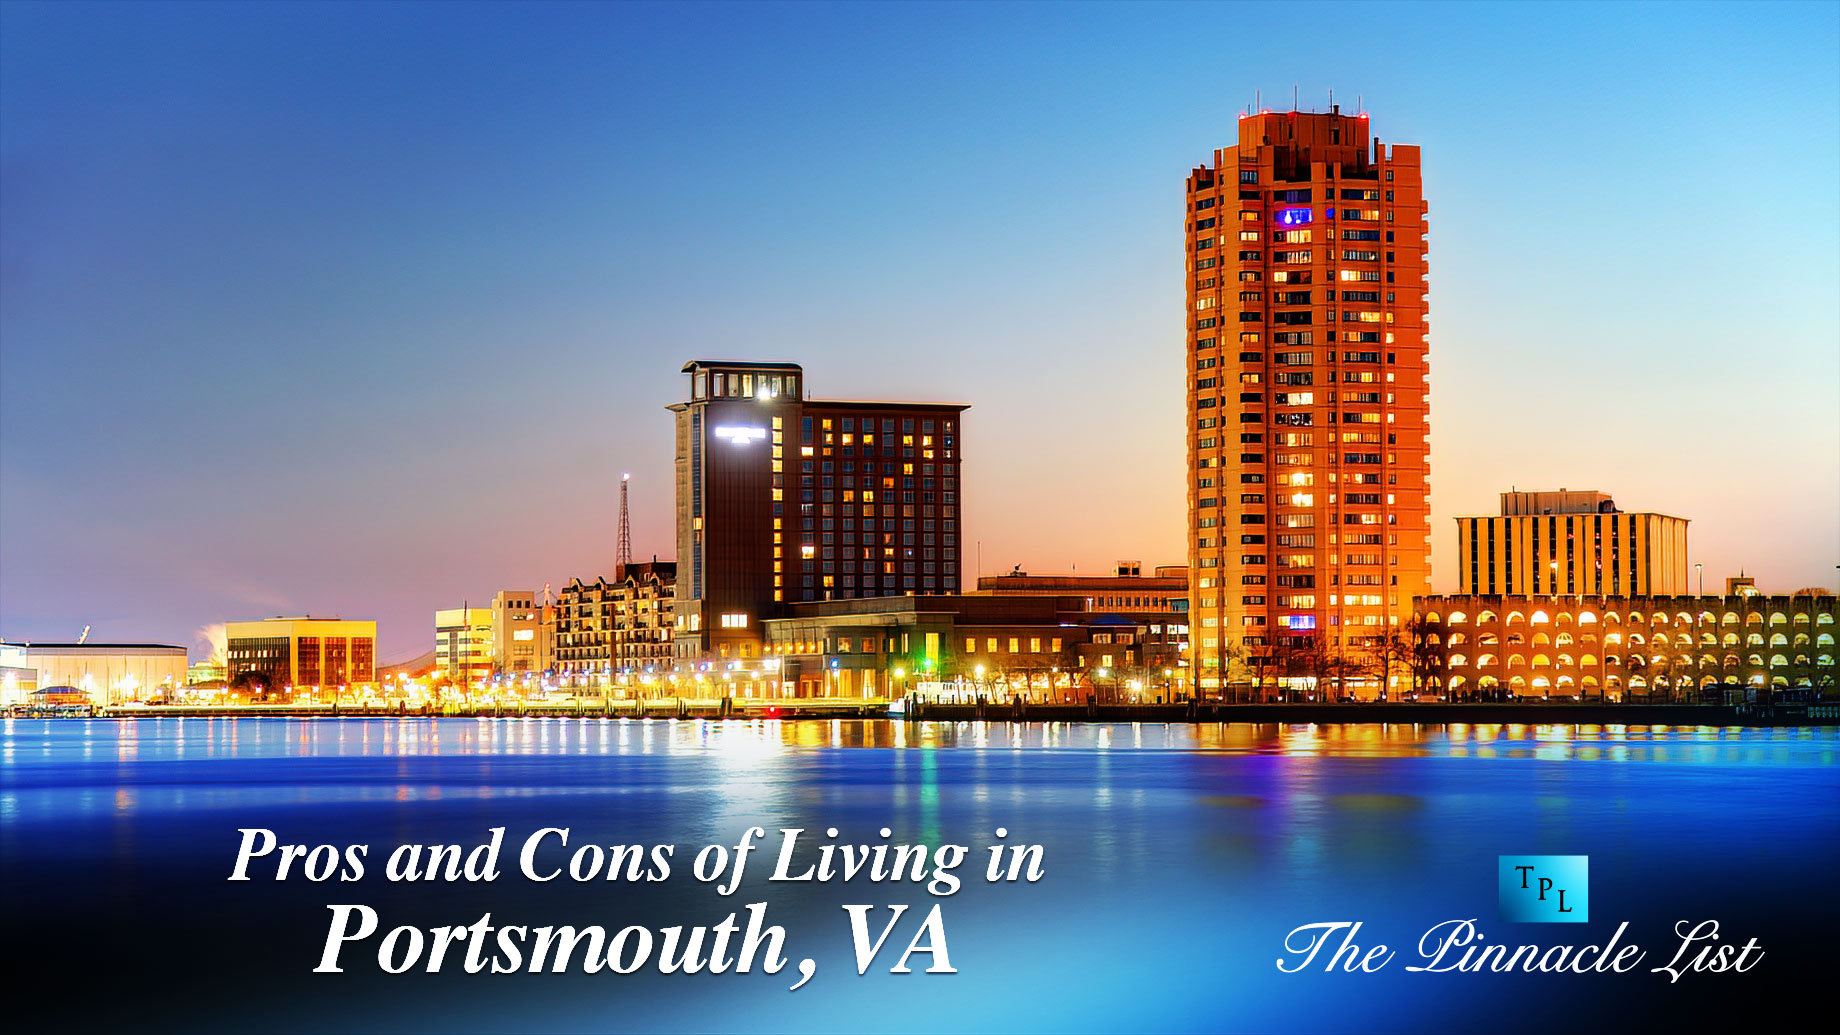 Pros and Cons of Living in Portsmouth, VA